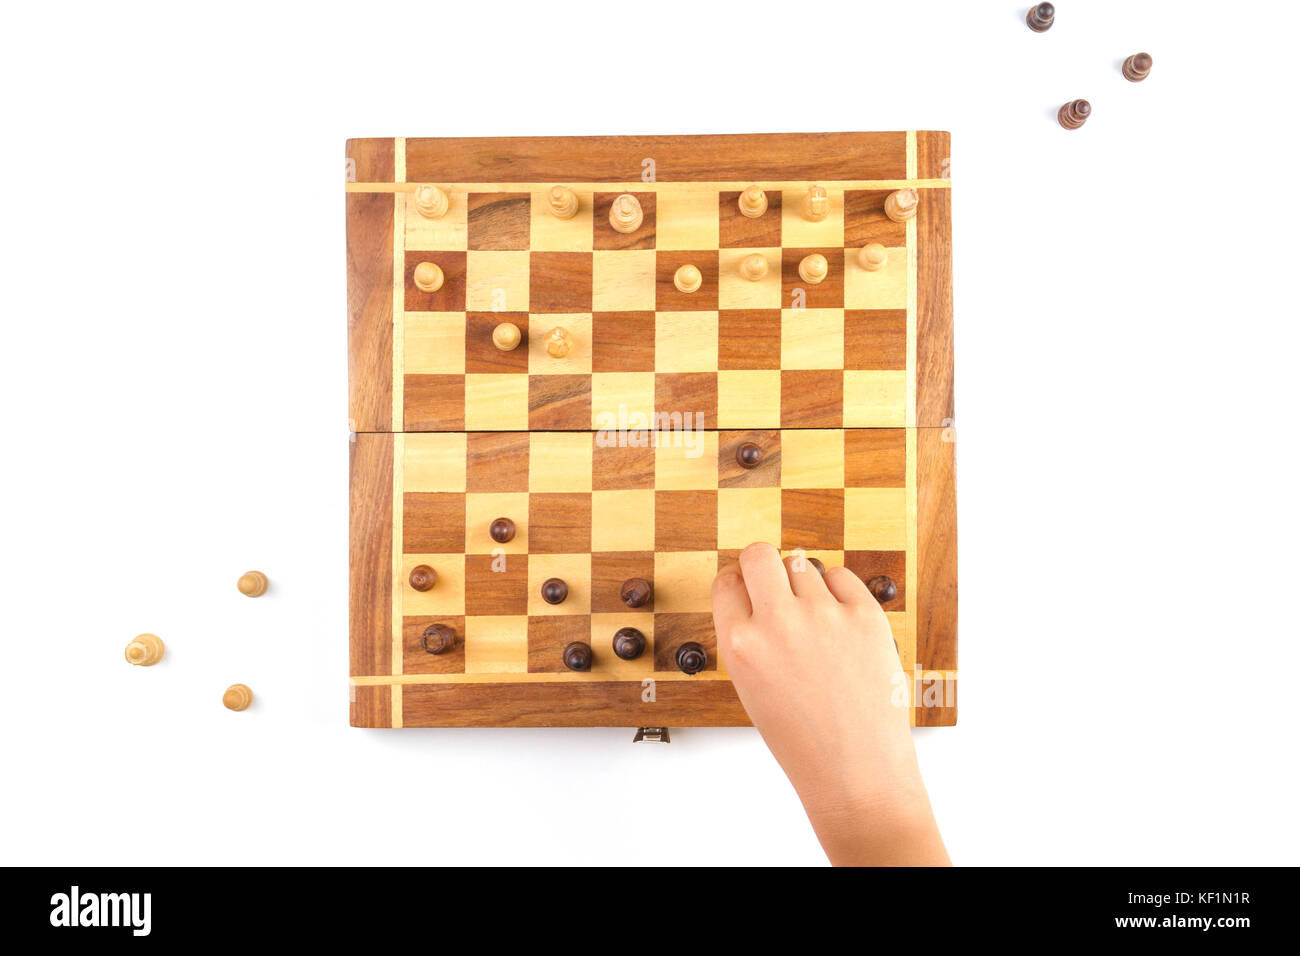 Chess board with chess pieces and a kid hand Stock Photo